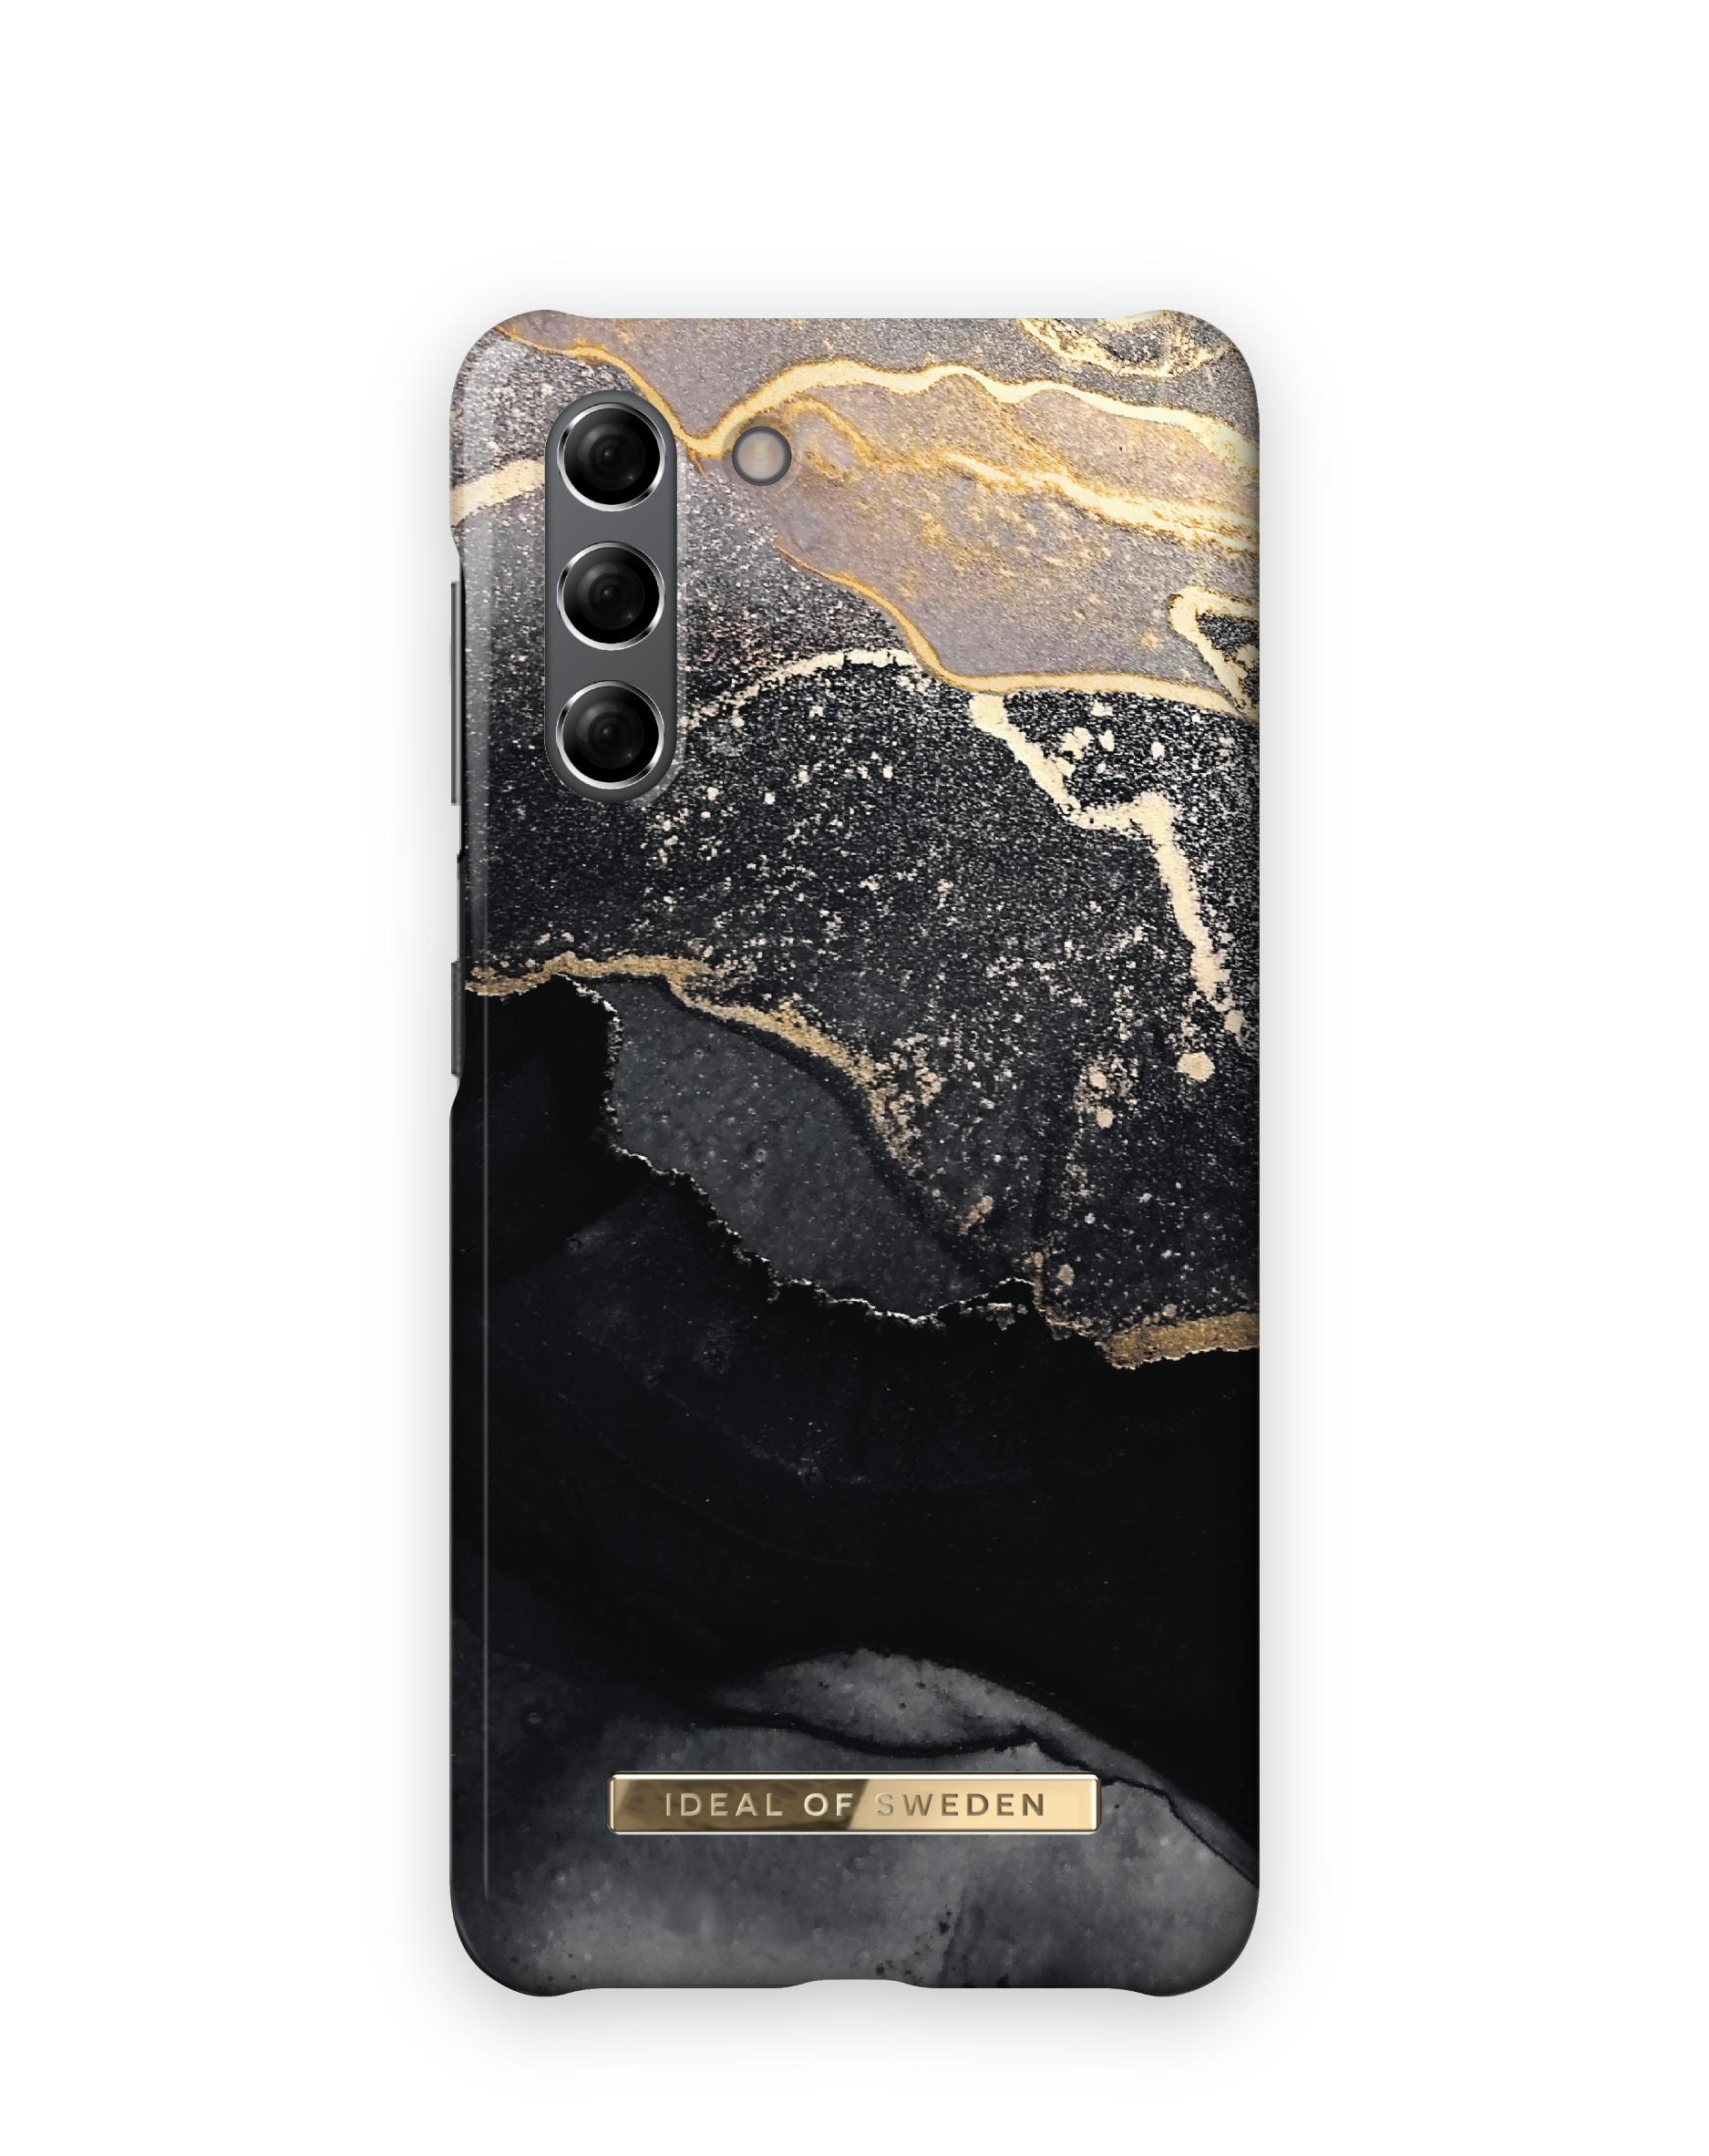 Backcover, S21, SWEDEN OF Twilight Galaxy Samsung, IDEAL IDFCAW21-S21-321, Golden